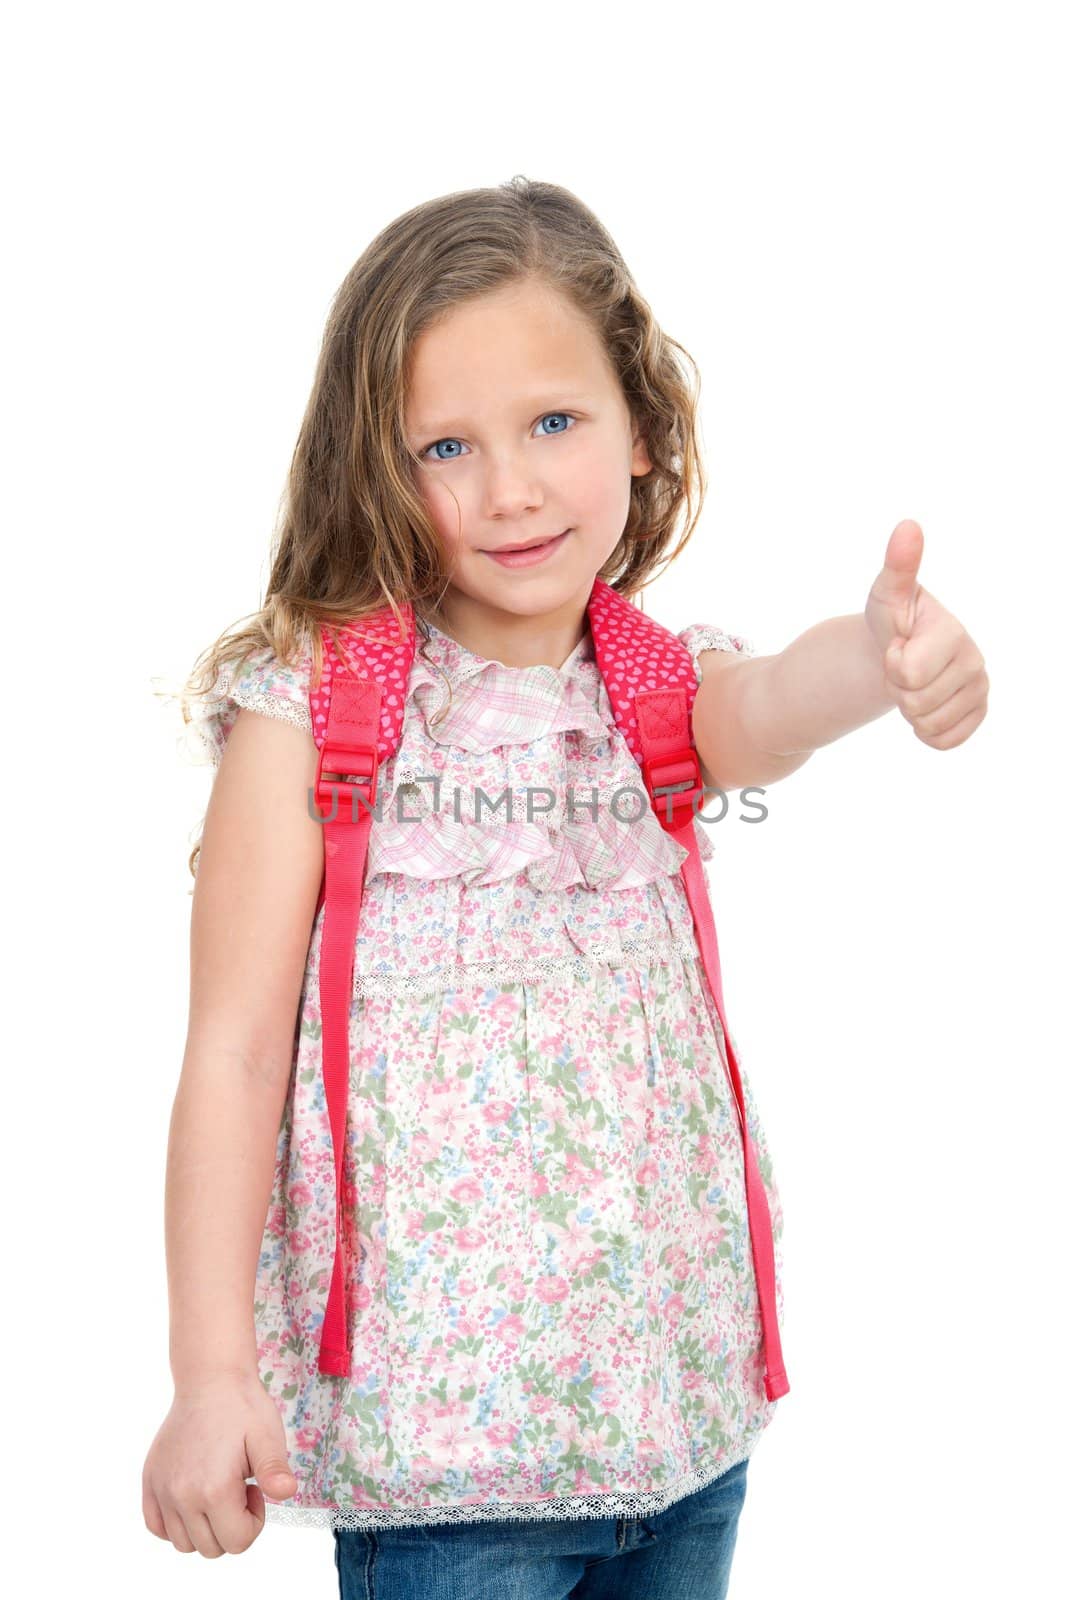 Portrait of cute blond schoolgirl showing thumbs up. Isolated on white.